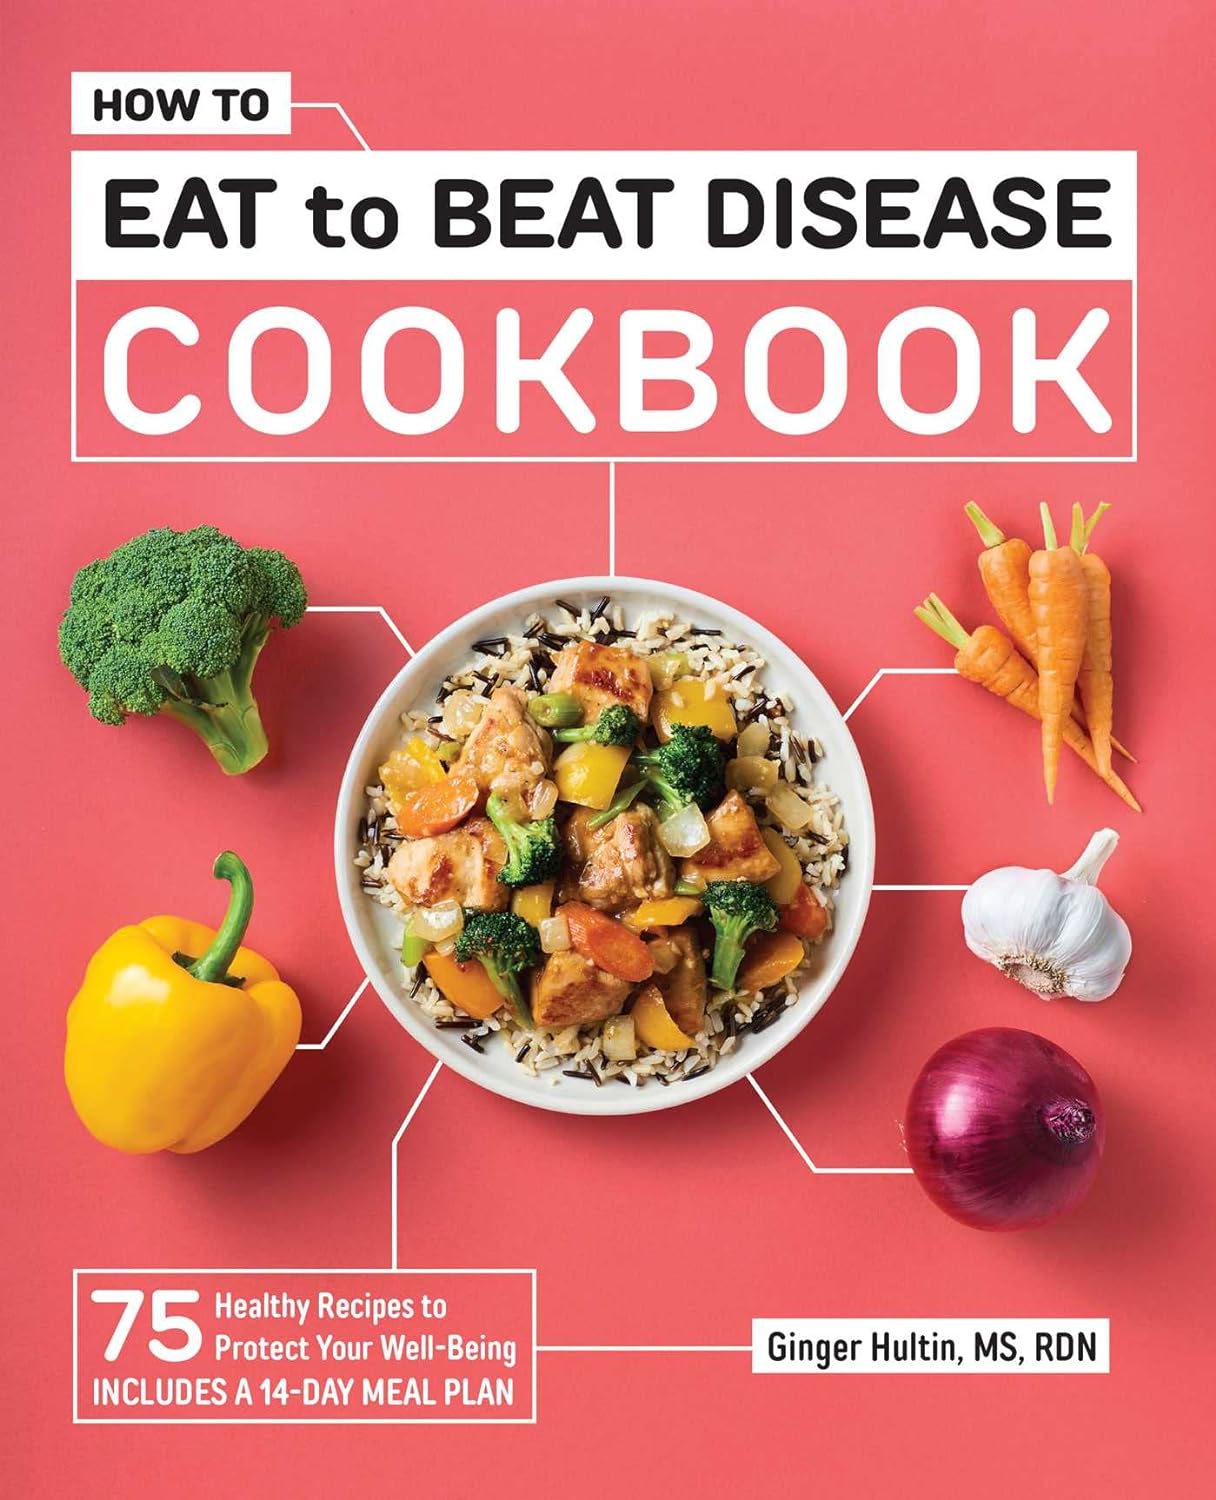 Ginger Hultin - How to Eat to Beat Disease Cookbook- 75 Healthy Recipes to Protect Your Well-Being